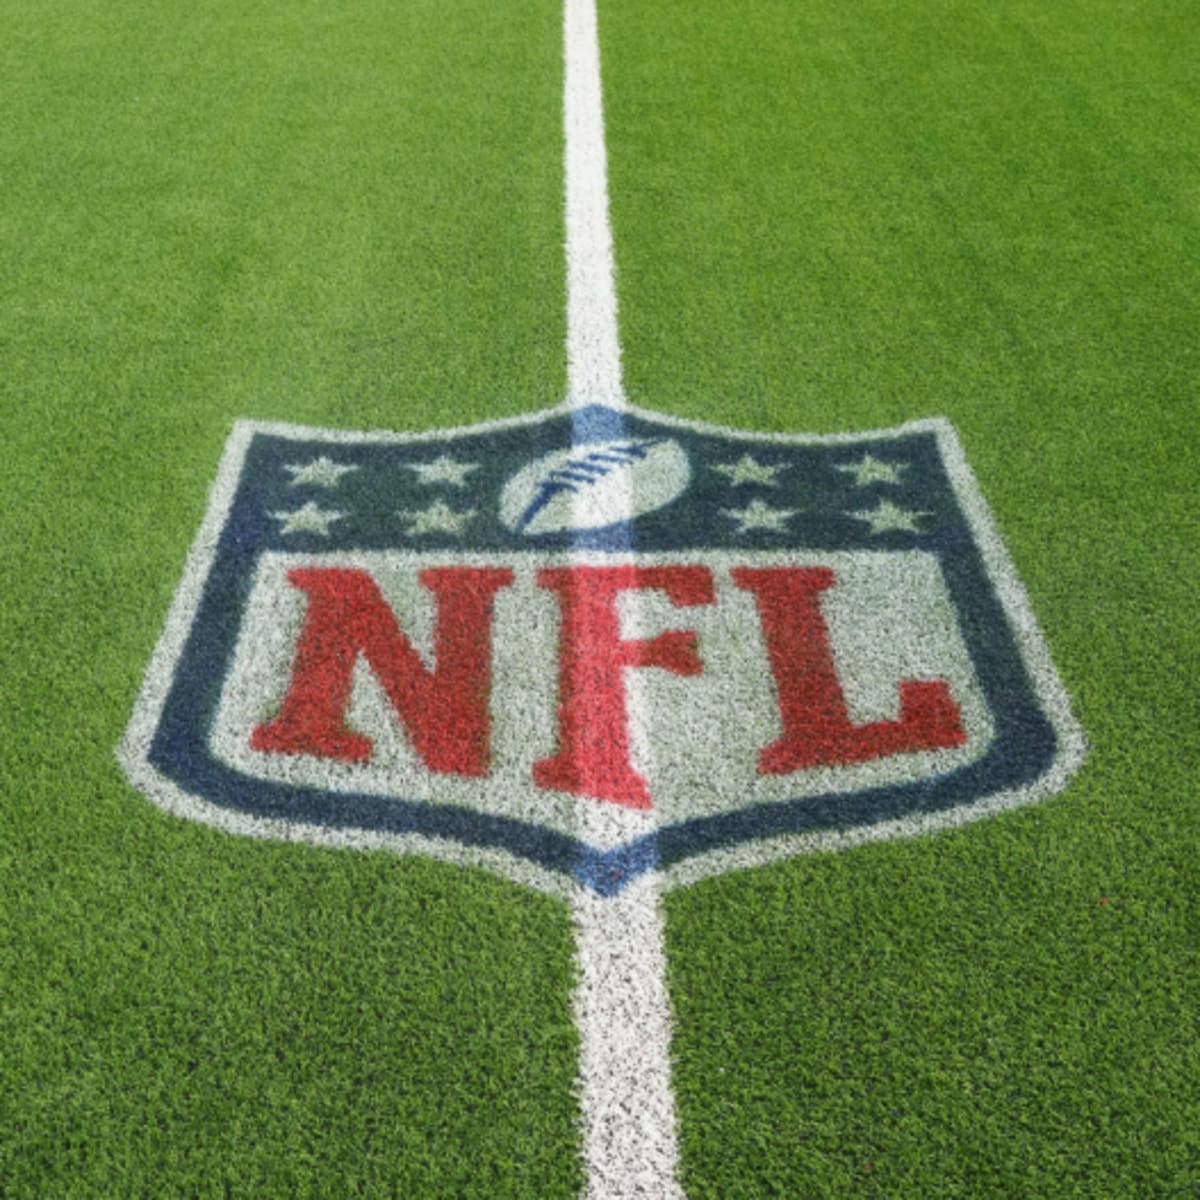 NFL referees for AFC, NFC championship: Full list of official